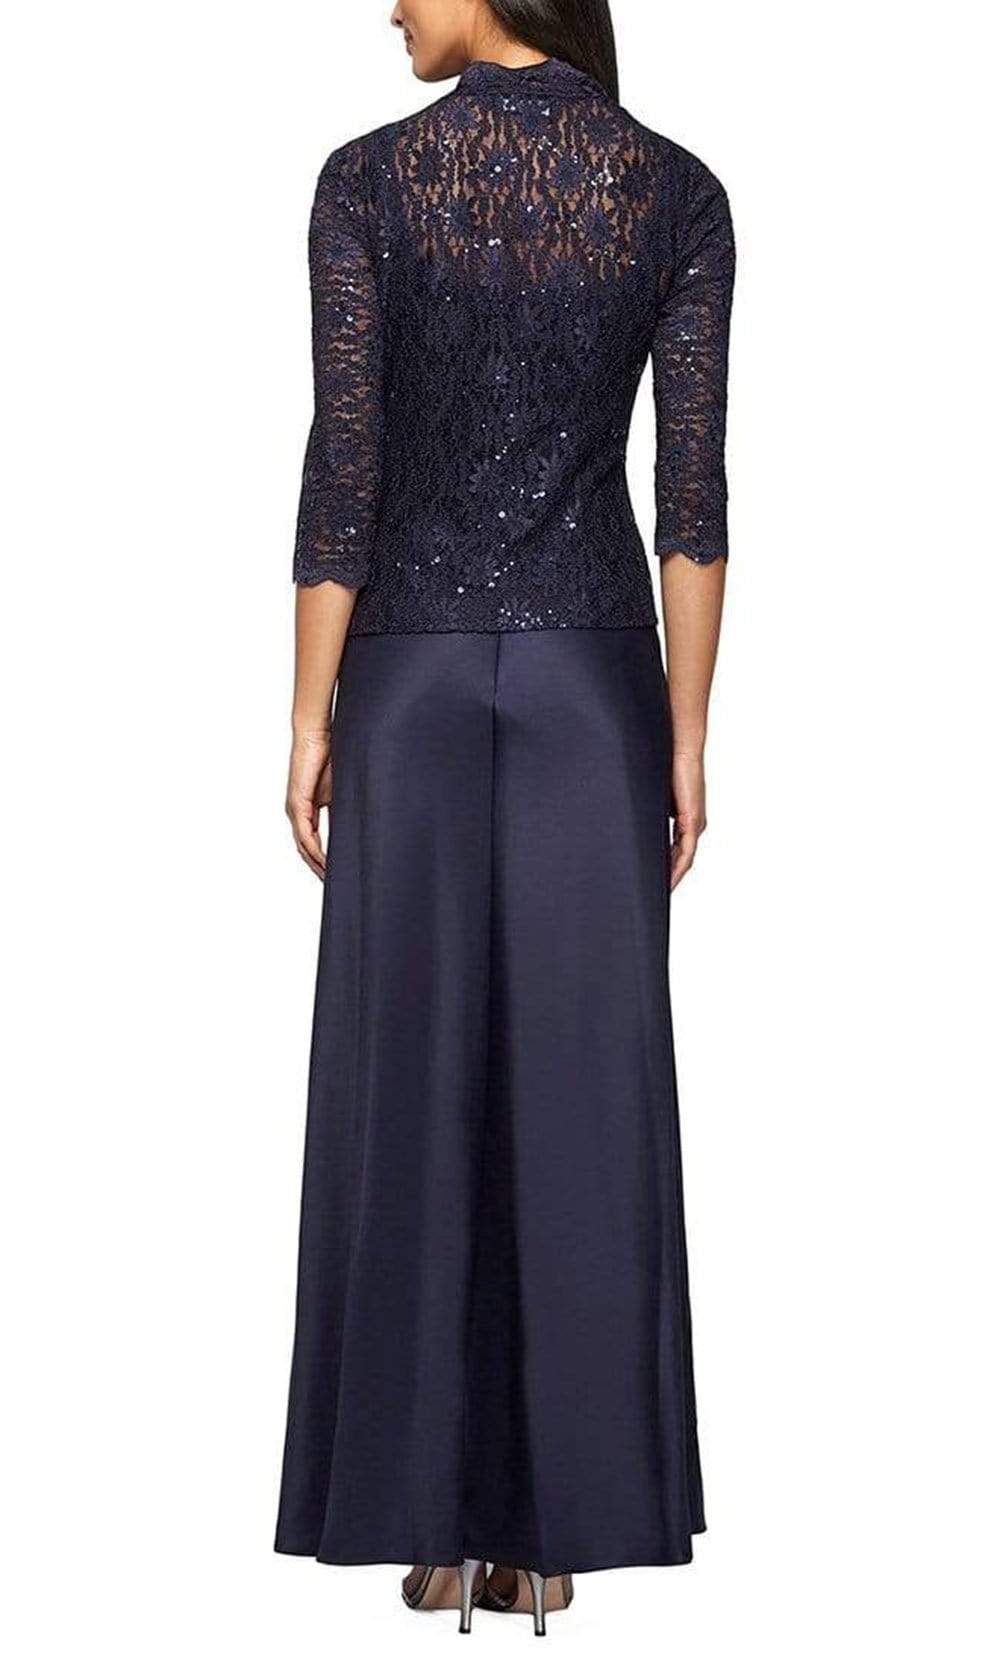 Alex Evenings - 1121198 Lace and Chiffon Dress with Lace Jacket Mother of the Bride Dresses